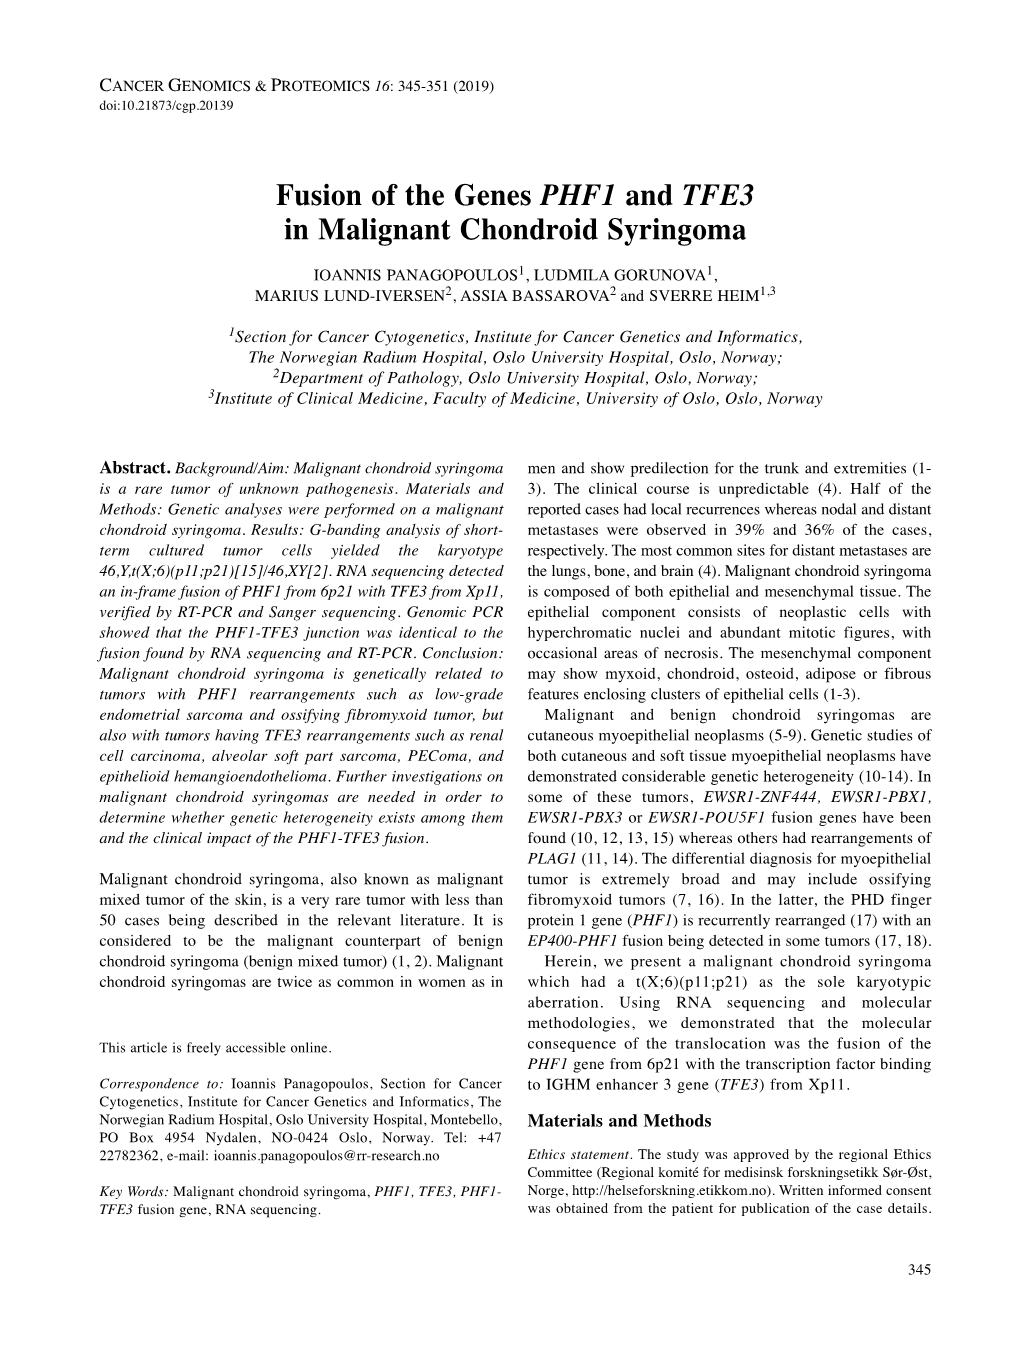 Fusion of the Genes PHF1 and TFE3 in Malignant Chondroid Syringoma